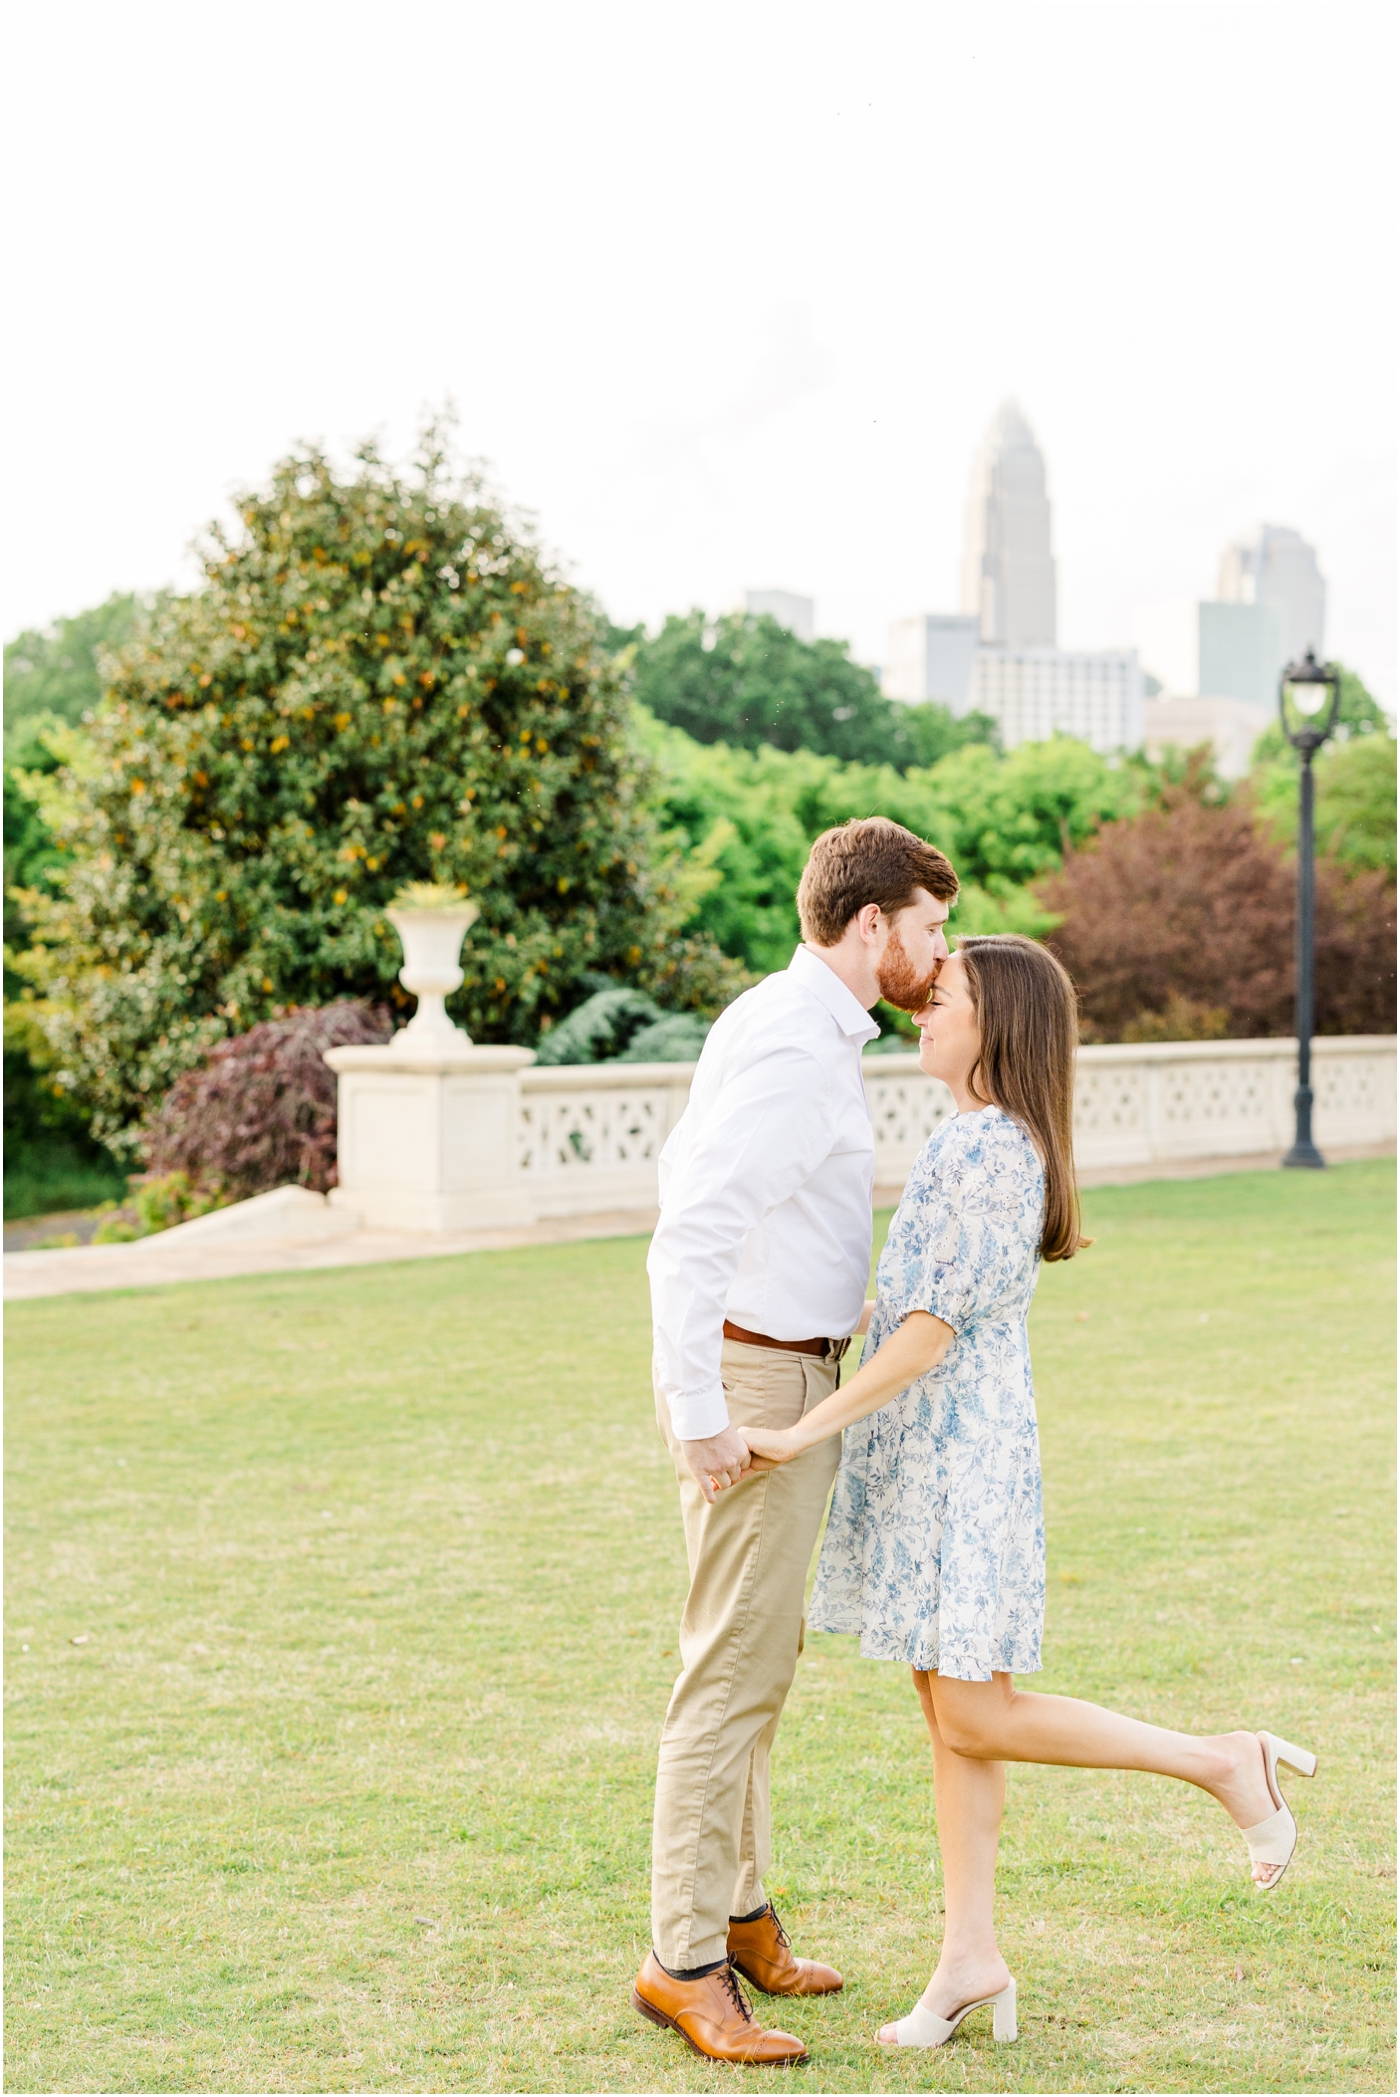 Midtown Park Engagement Session in Charlotte NC
